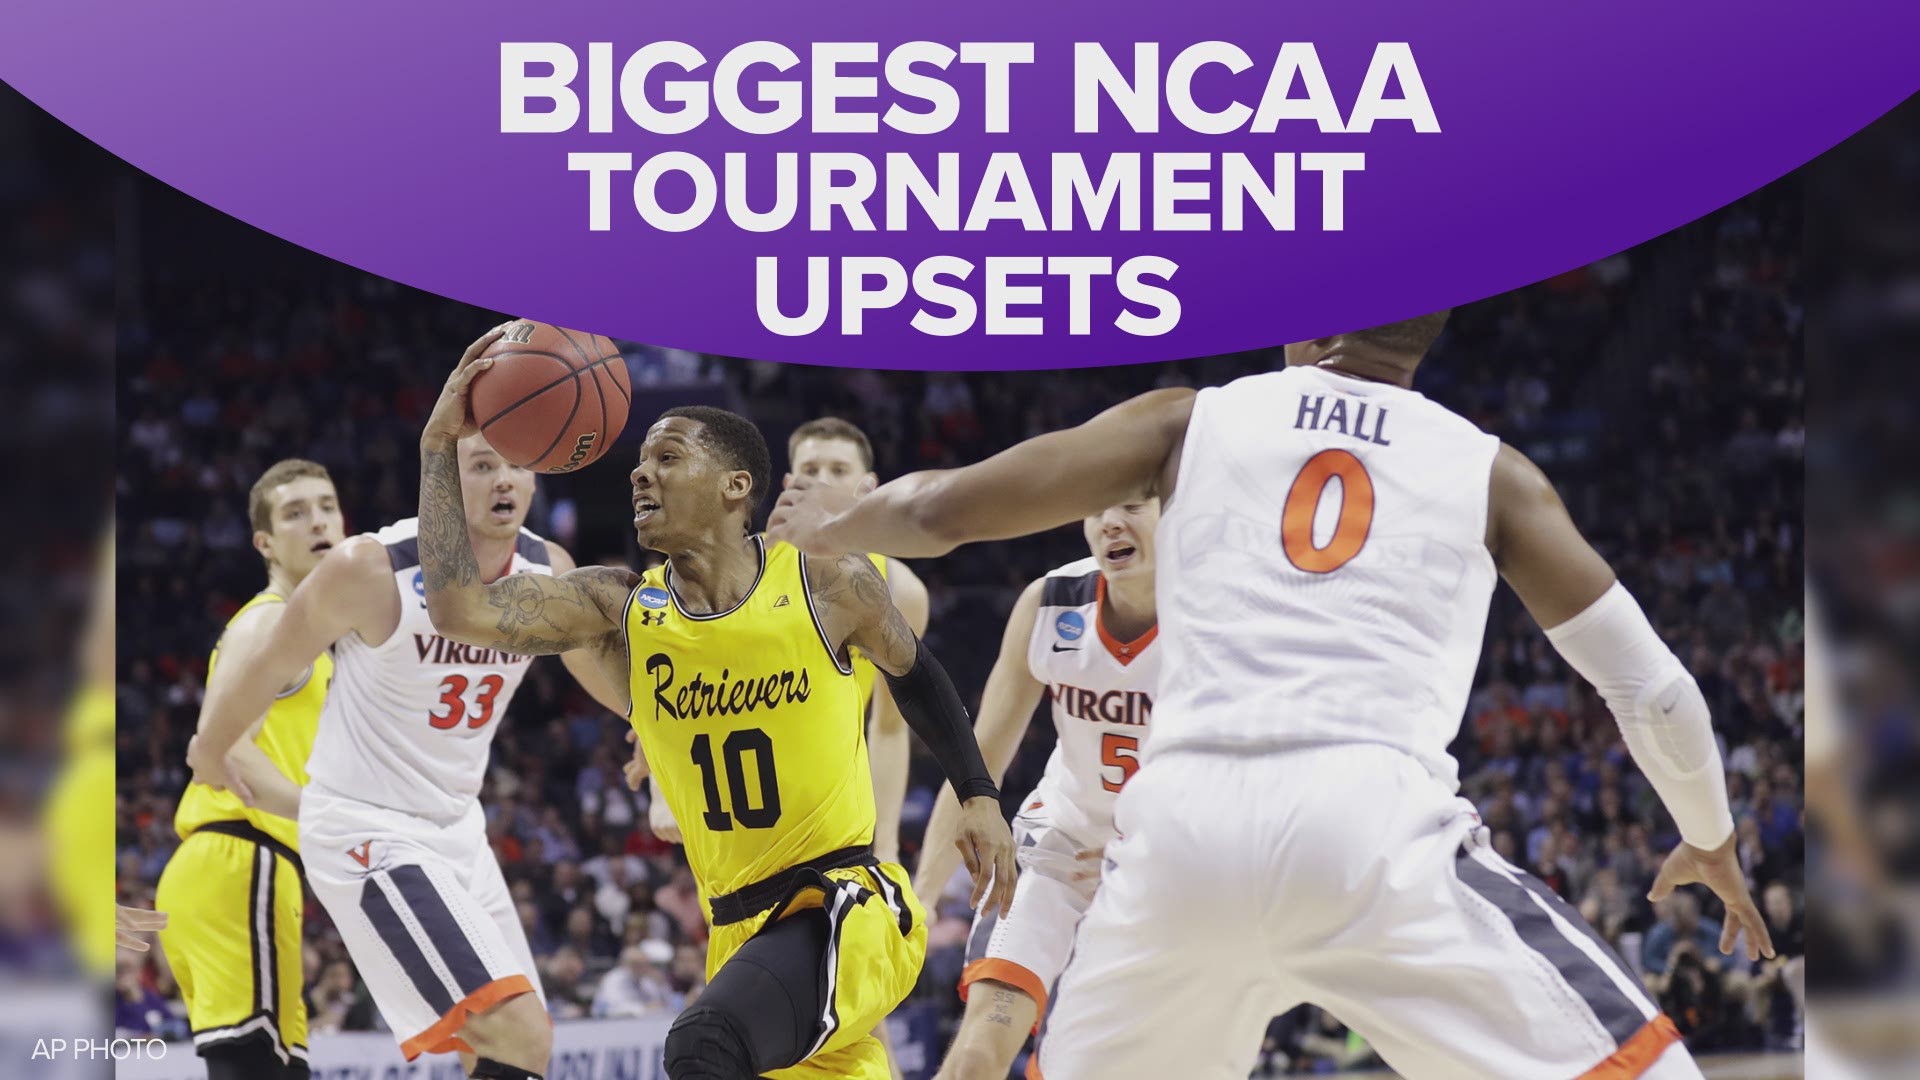 Here are 10 of the biggest NCAA bracket busters in history.